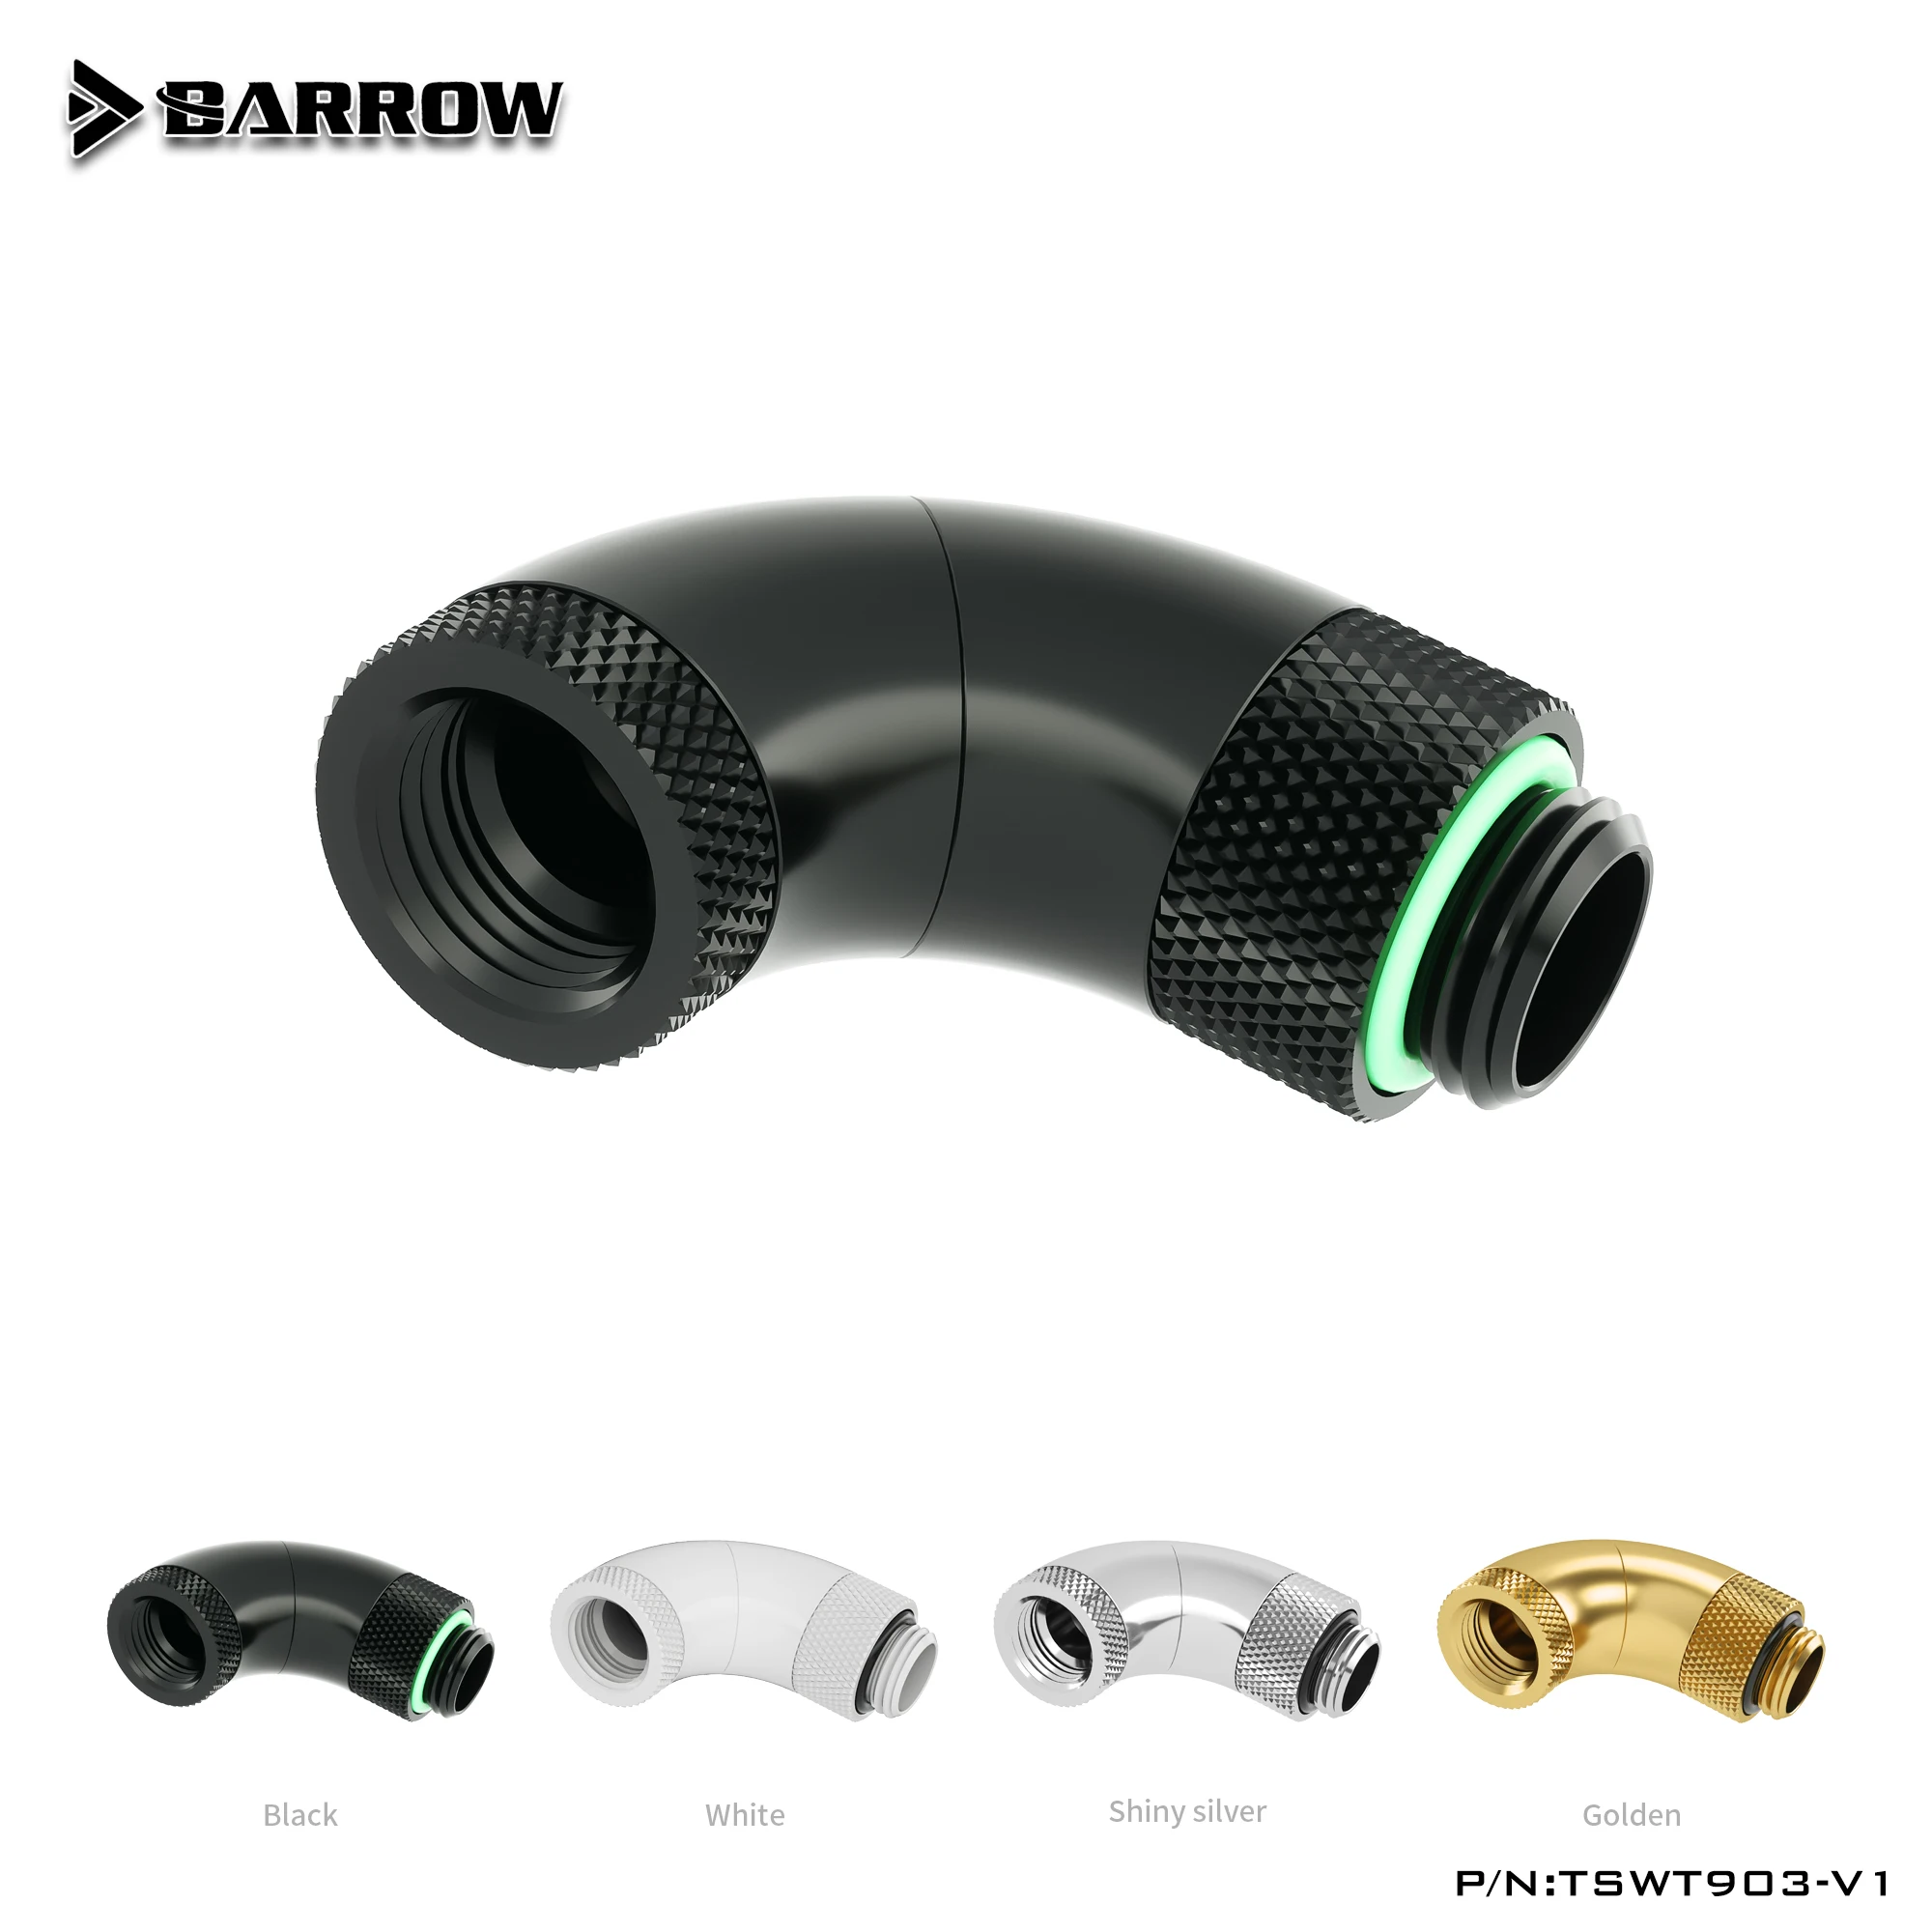 

Barrow G1/4" White Black Silver Three Rotary 90-Degree 360 degree rotatable IG1/4" Extender water cooling fittings TSWT903-V1